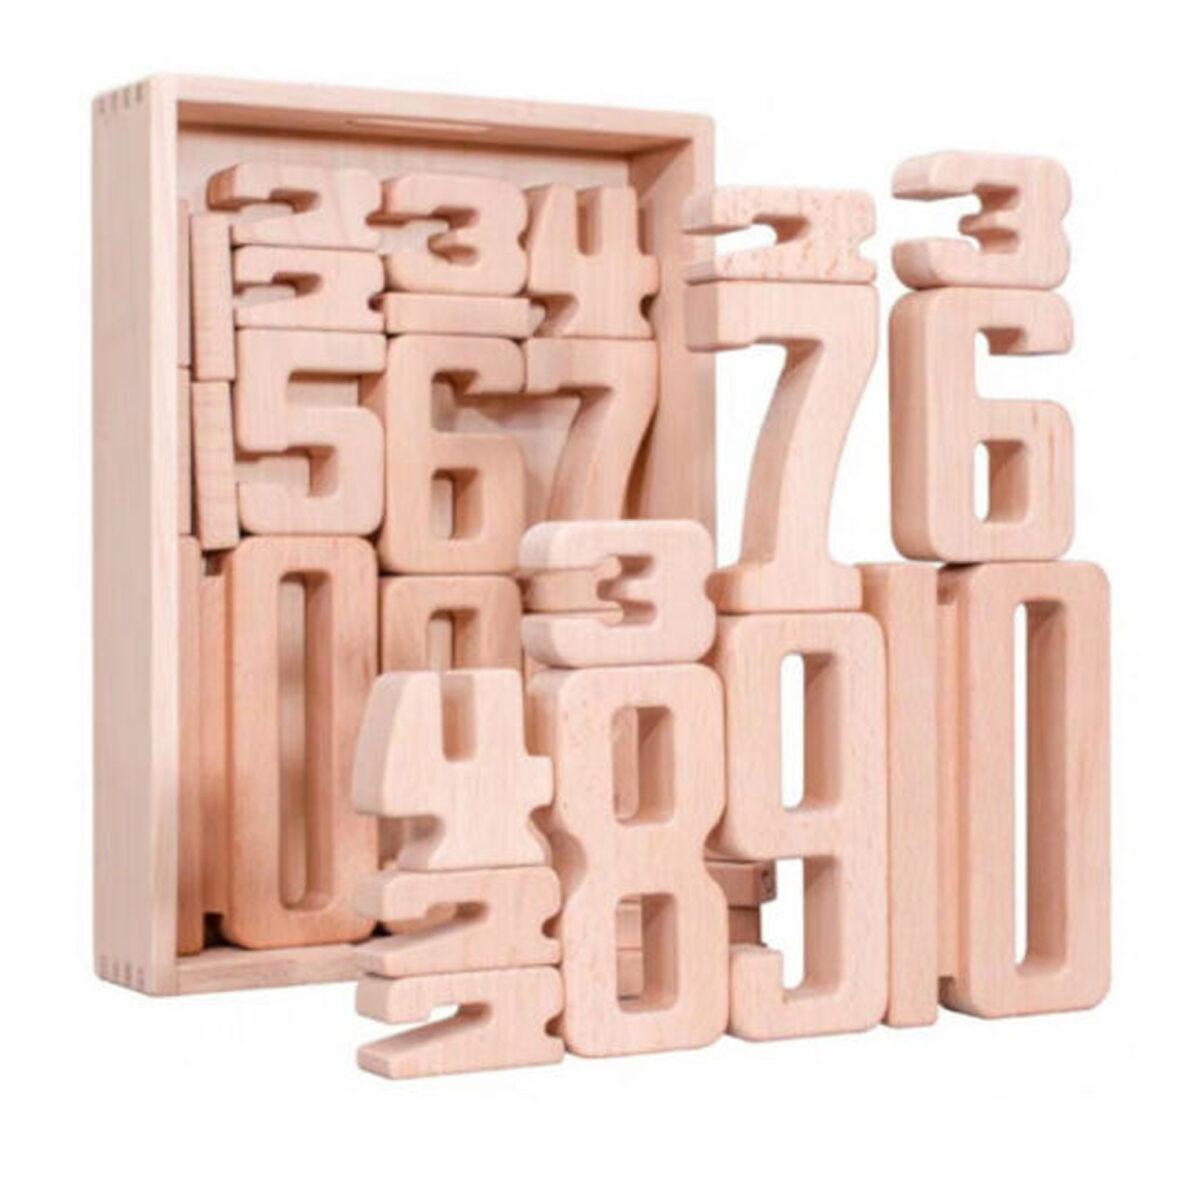 32 Pieces Building Numbers Stacking Wooden Blocks, Math Learning Educational Toy